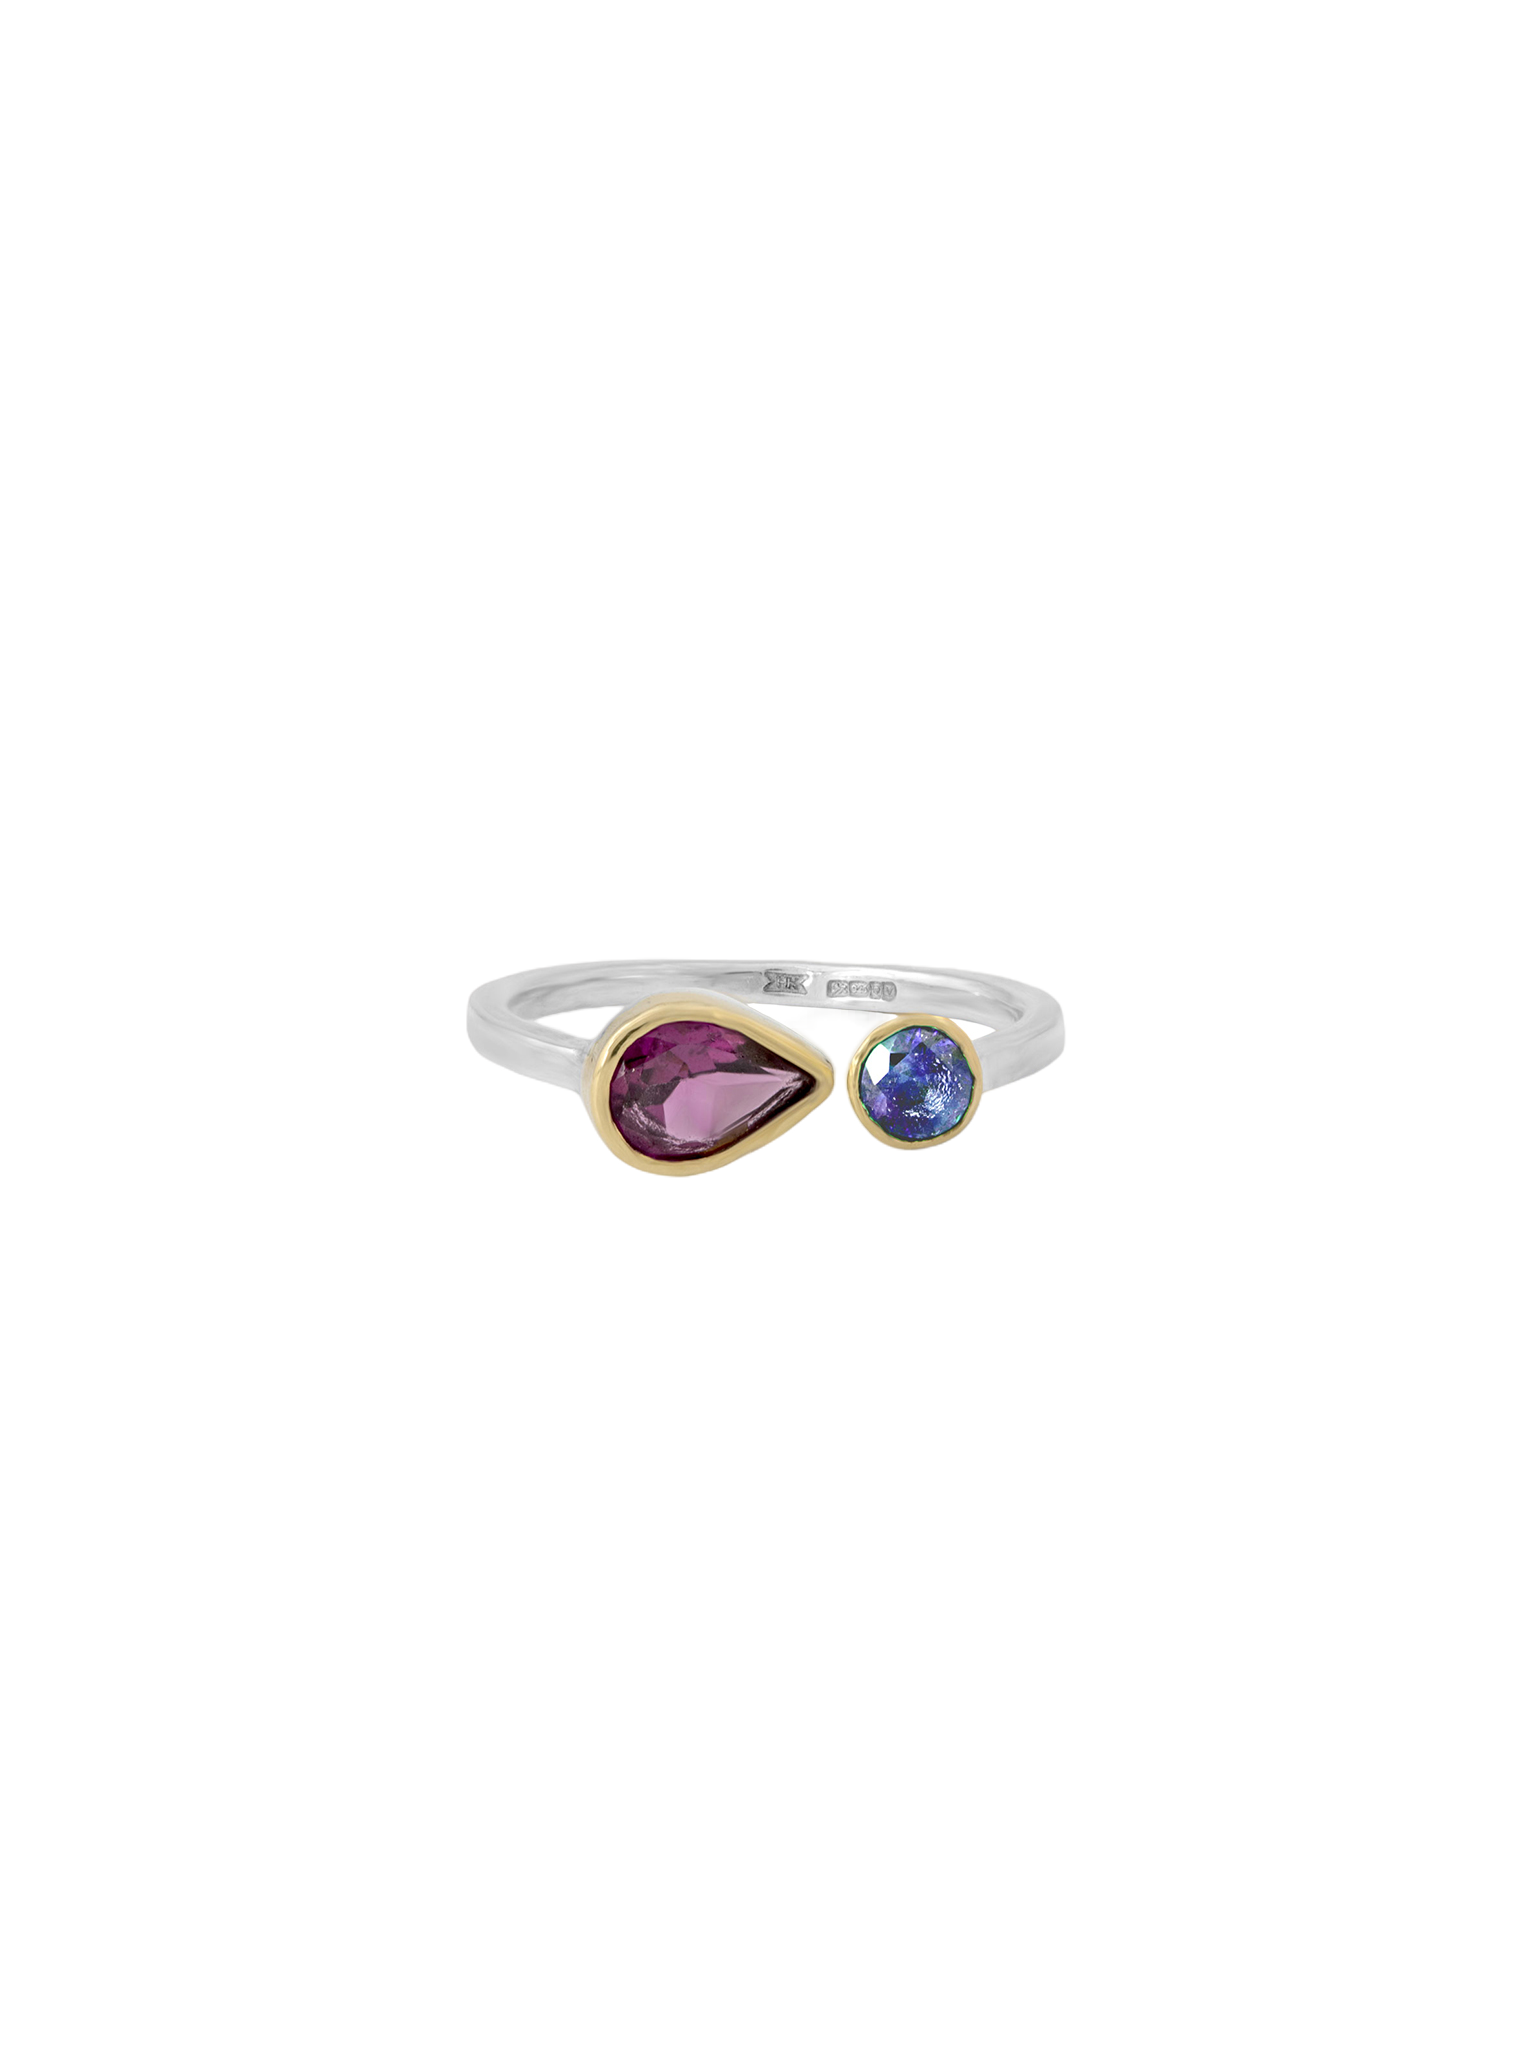 Exclamation ring set with tanzanite and rhodolite garnet